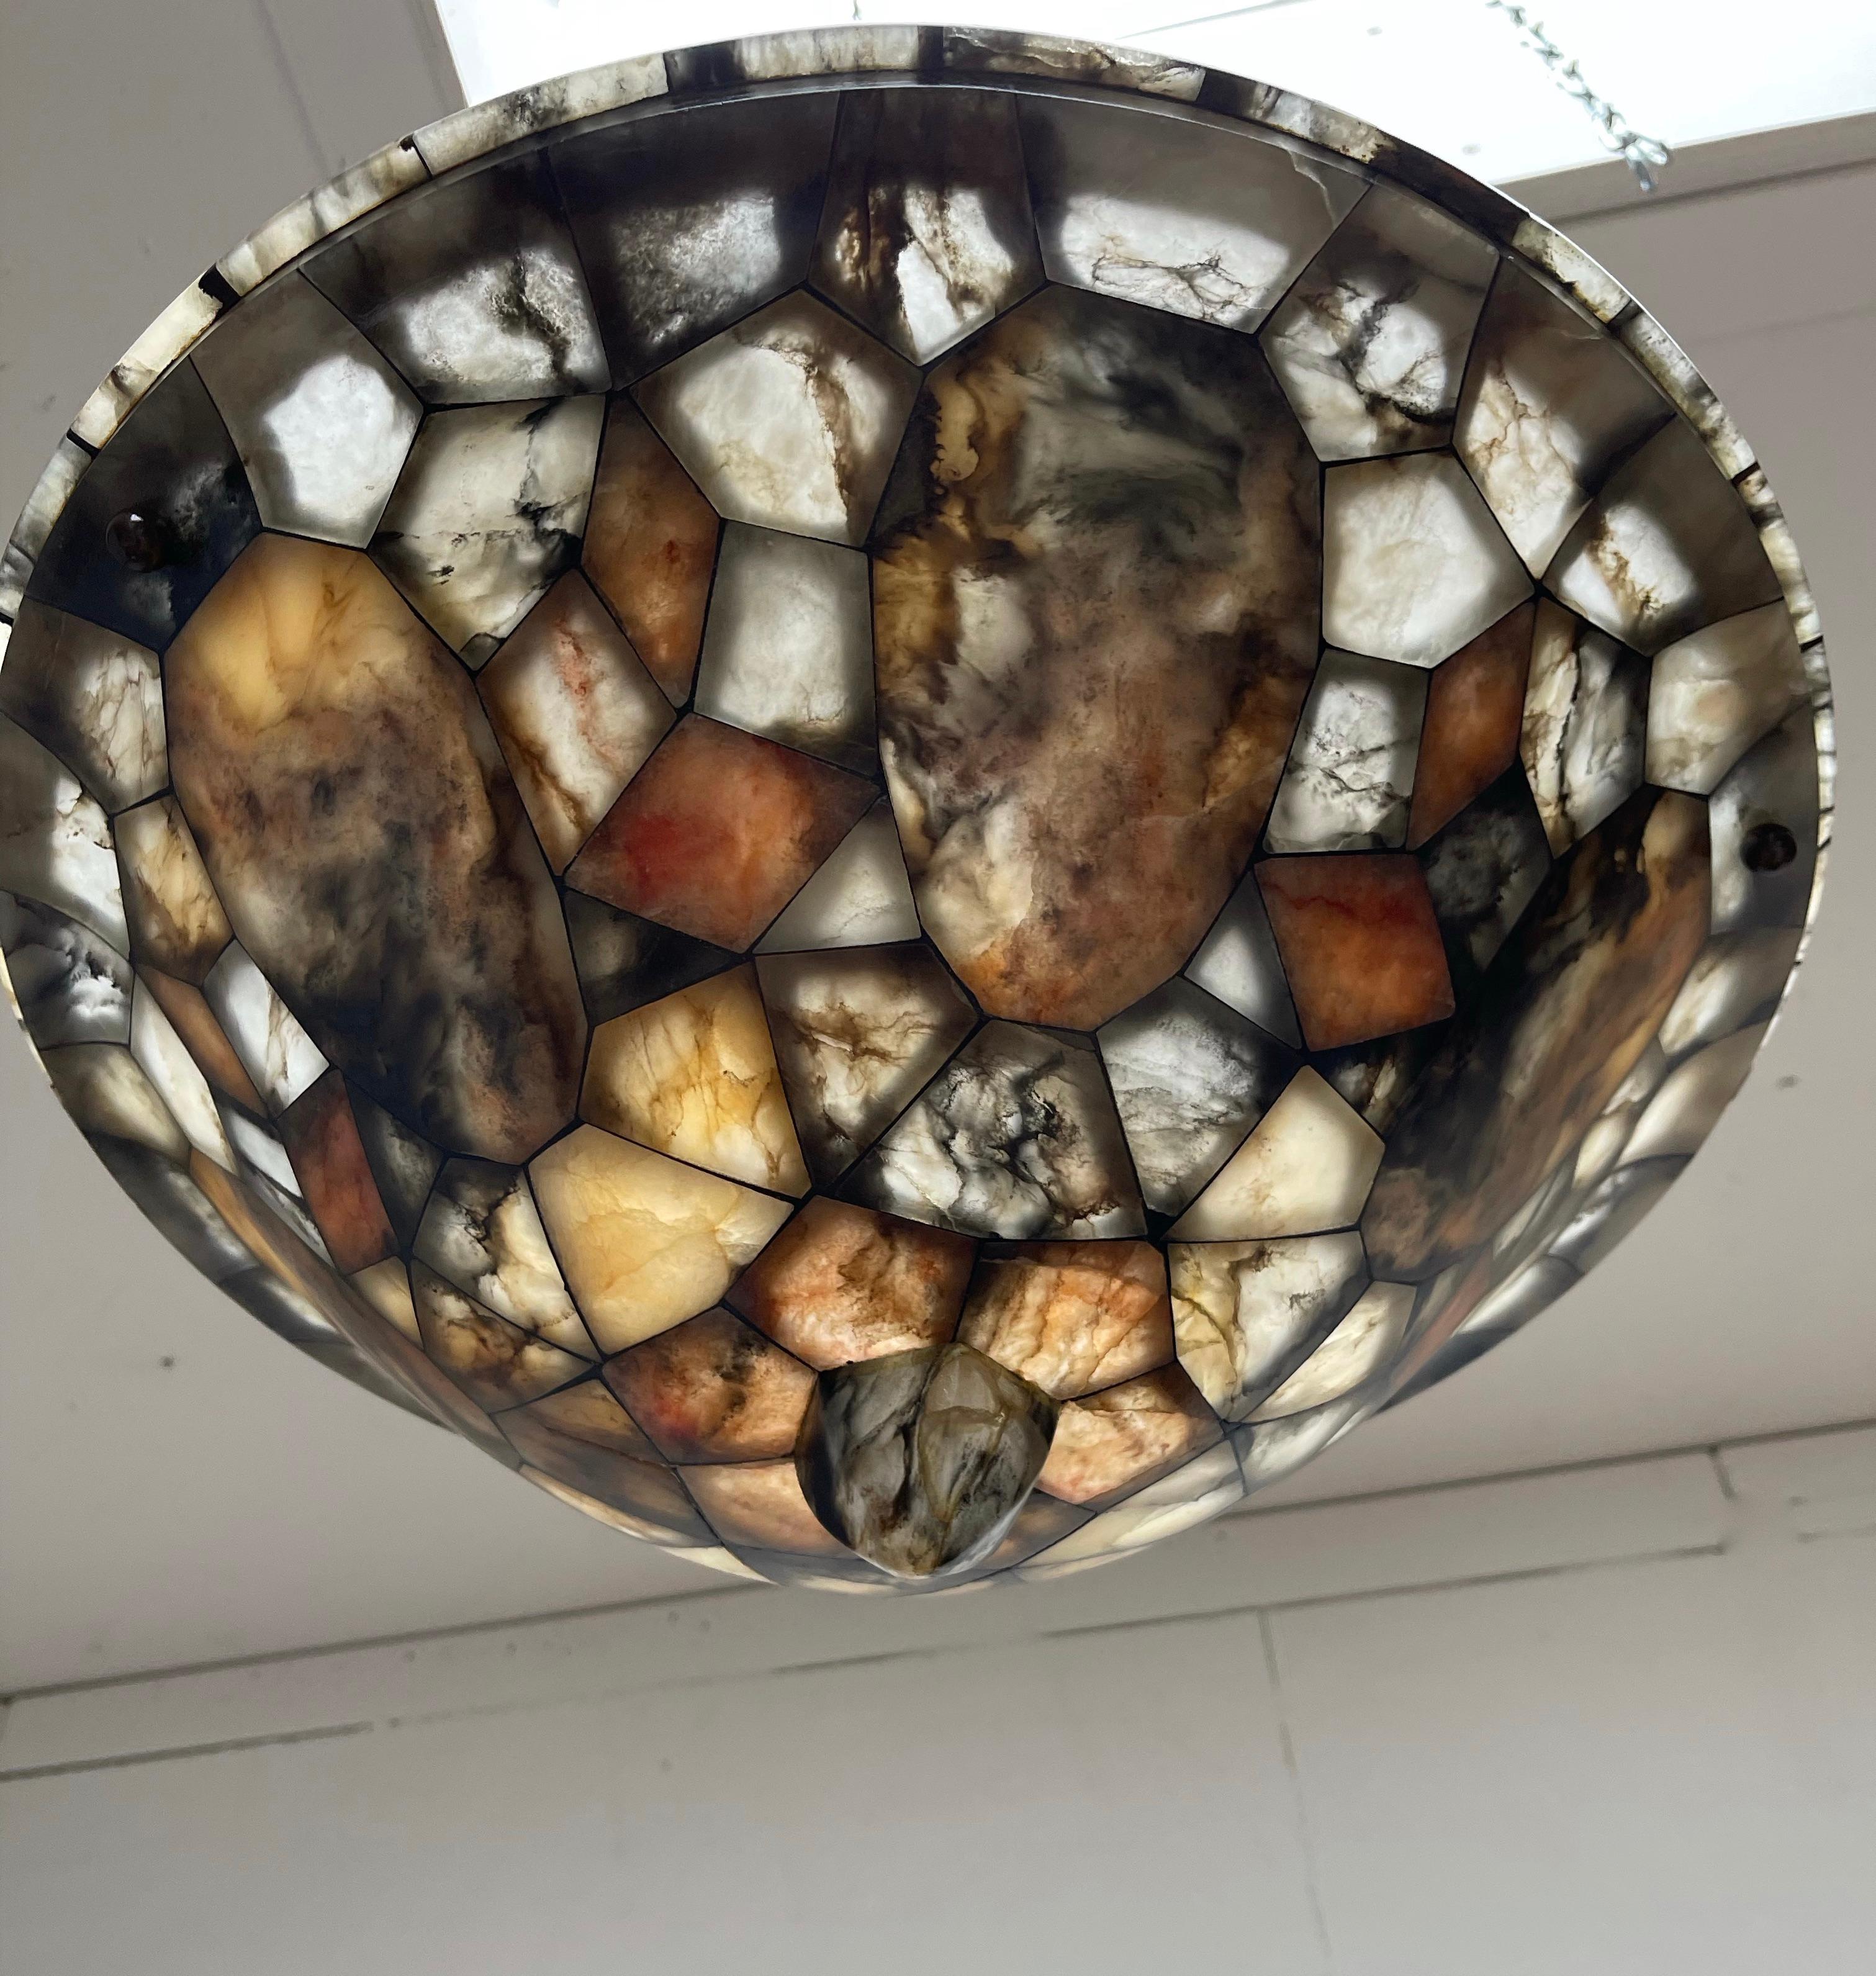 This amazing and impressive 1920s pendant is unlike anything you ever saw.

With early 20th century light fixtures as one of our specialities, over the years, we have sold a number of remarkable alabaster pendants. However, when we recently saw this